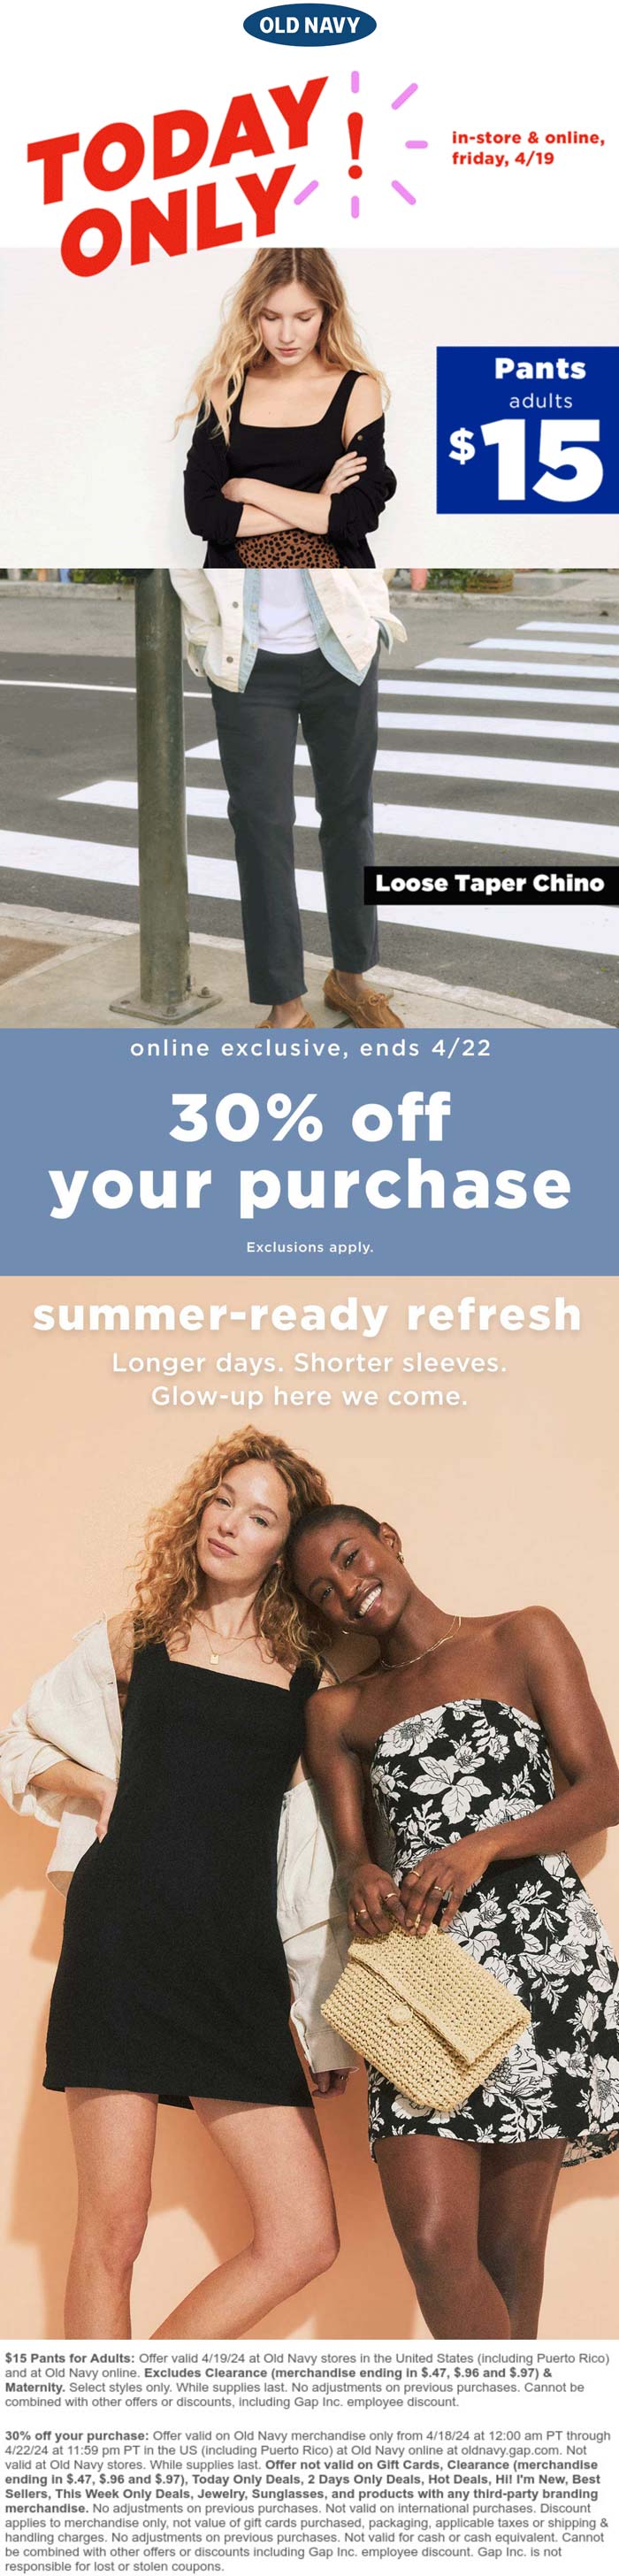 Old Navy stores Coupon  $15 pants today at Old Navy, ditto online + 30% off the tab #oldnavy 